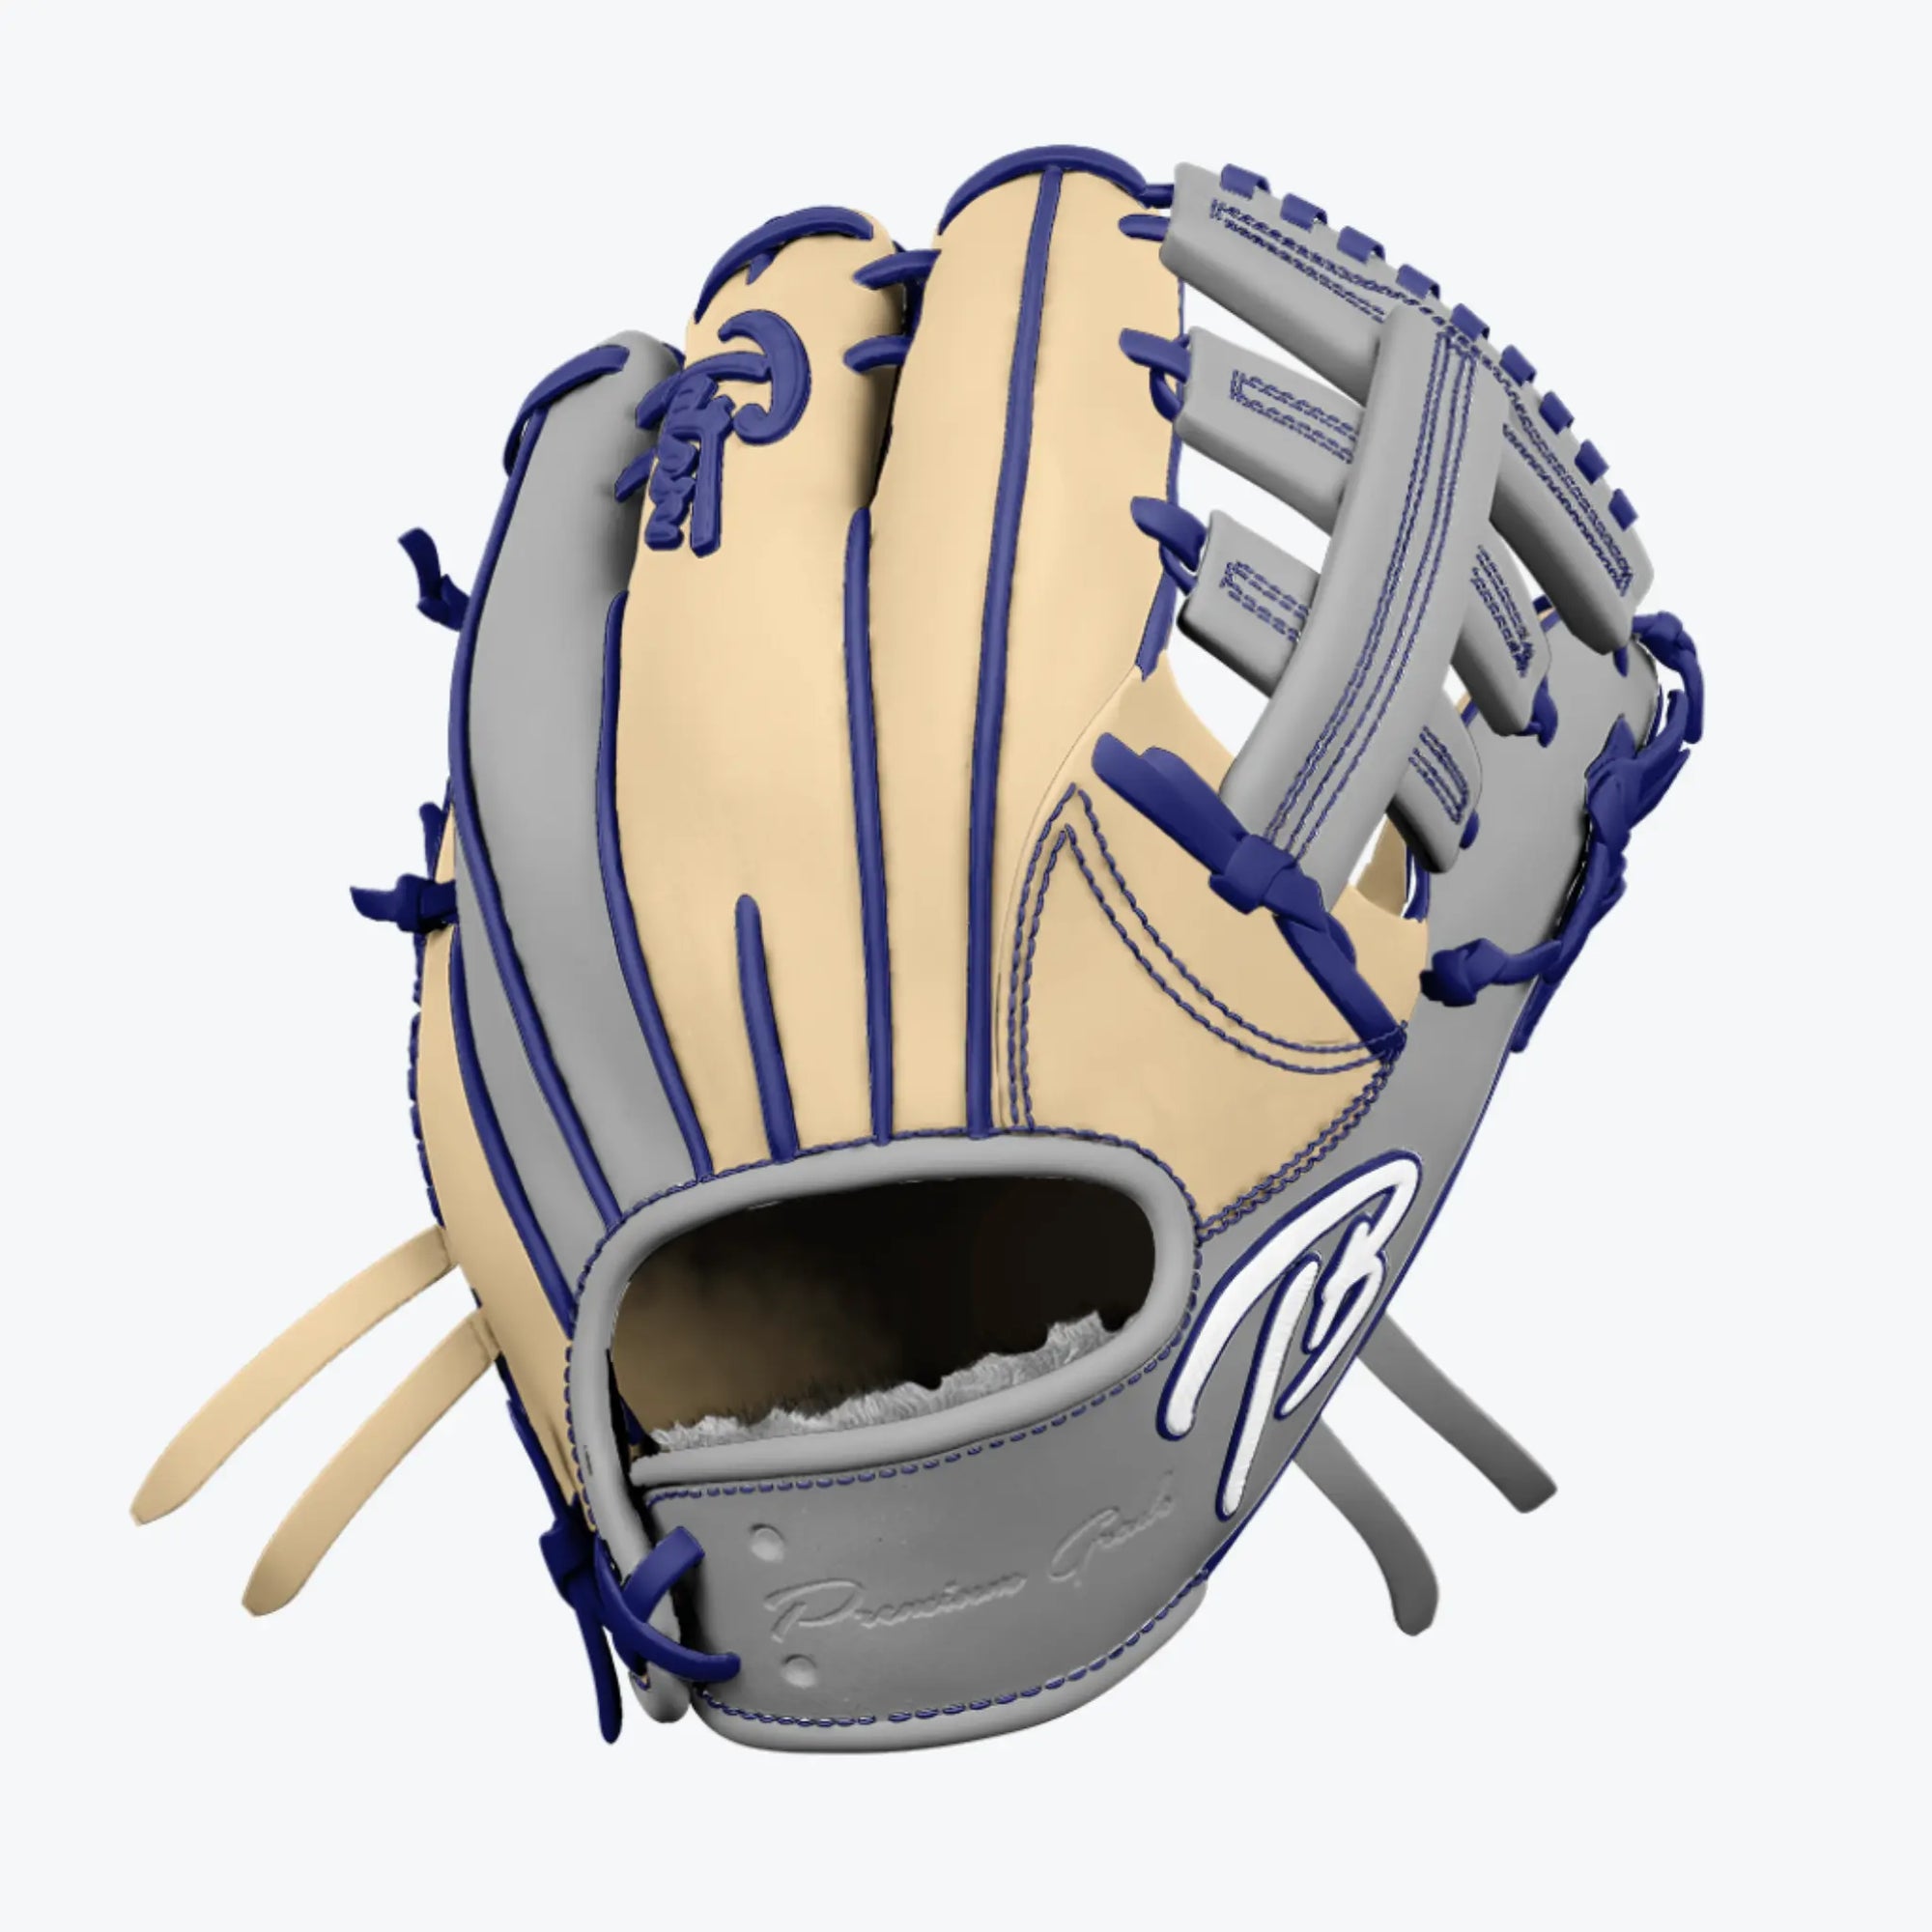 Custom-crafted outfielder's baseball glove with a double post web design by Tater, featuring a cream and navy color scheme, with a prominent 'TB' logo and 'Premium Grade' inscription, ready for game-day action.